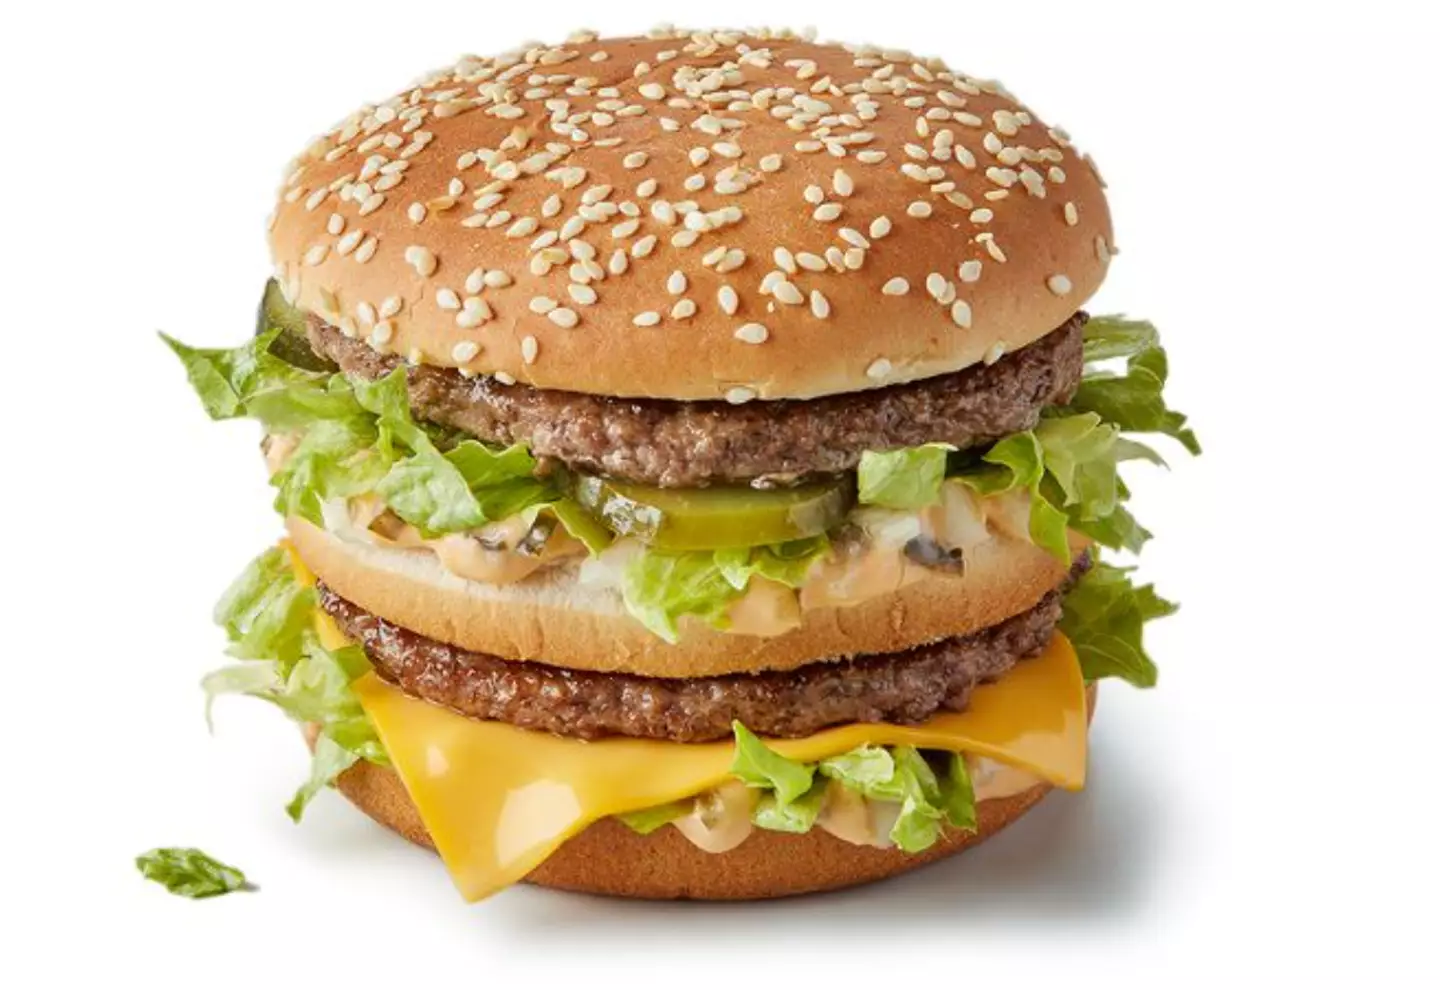 The hack allows you to get a Big Mac for less than half what you'd normally pay.